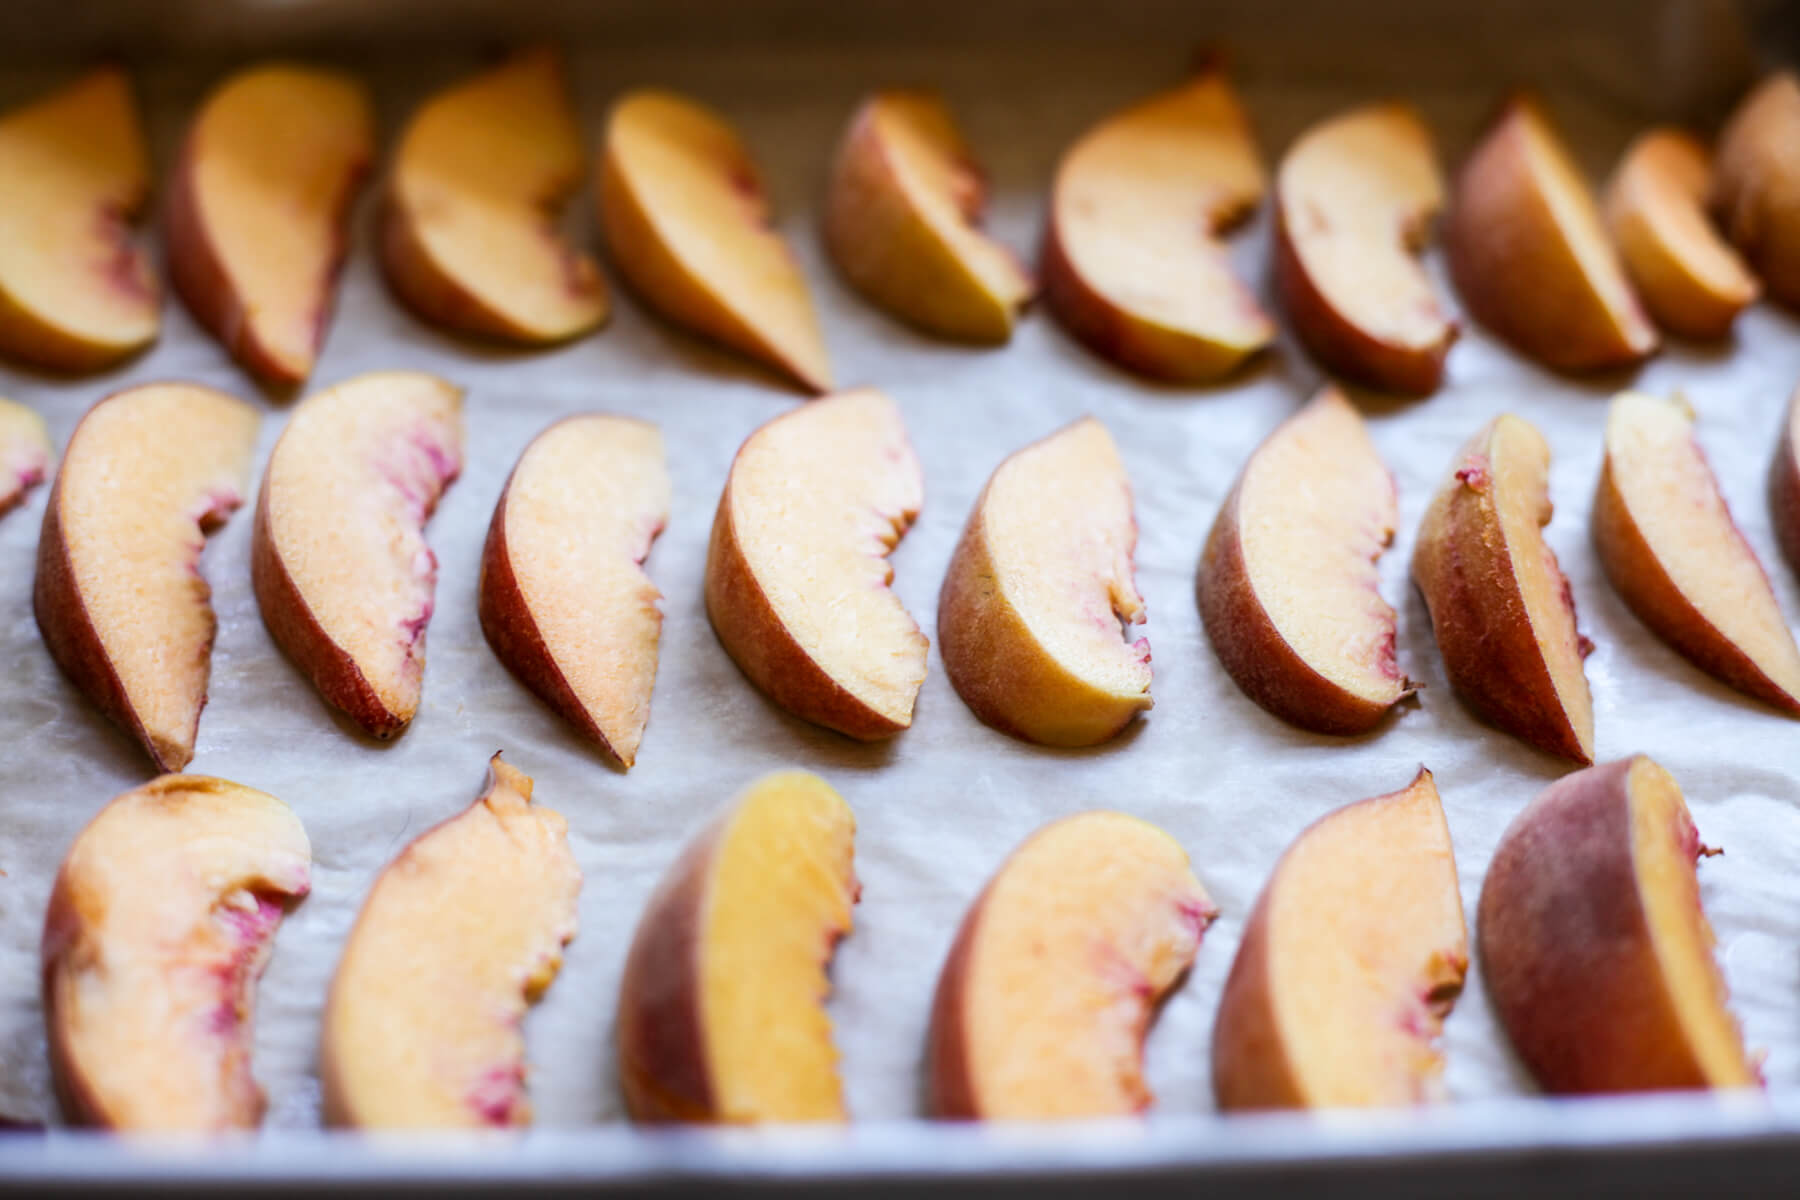 Peach slices lined up on a cookies sheet to freeze.